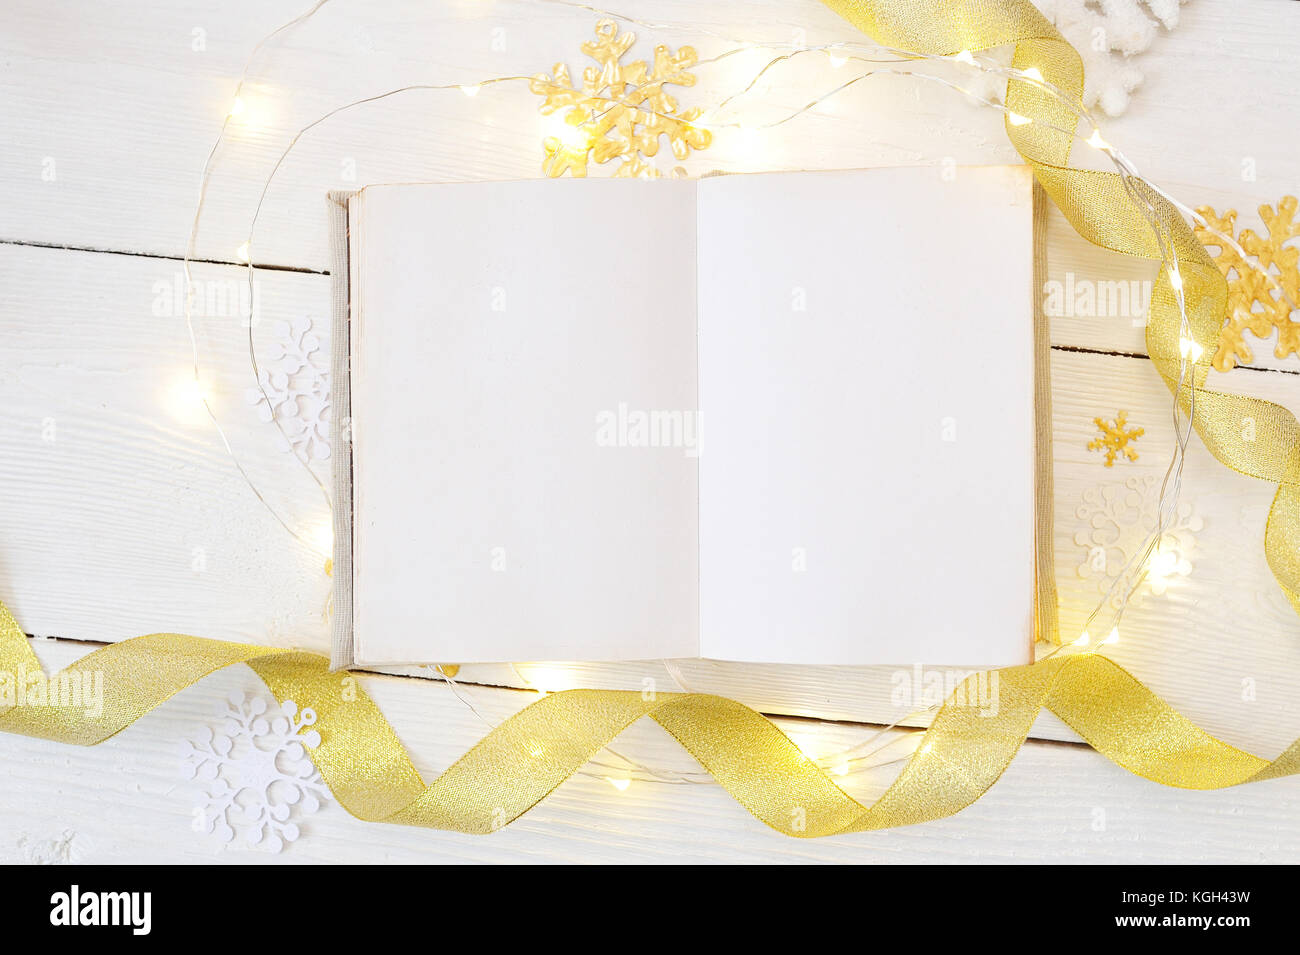 Mockup christmas or new year frame composition. mockup of book and golden christmas decorations on wooden background. holiday and celebration concept for postcard or invitation. top view Stock Photo